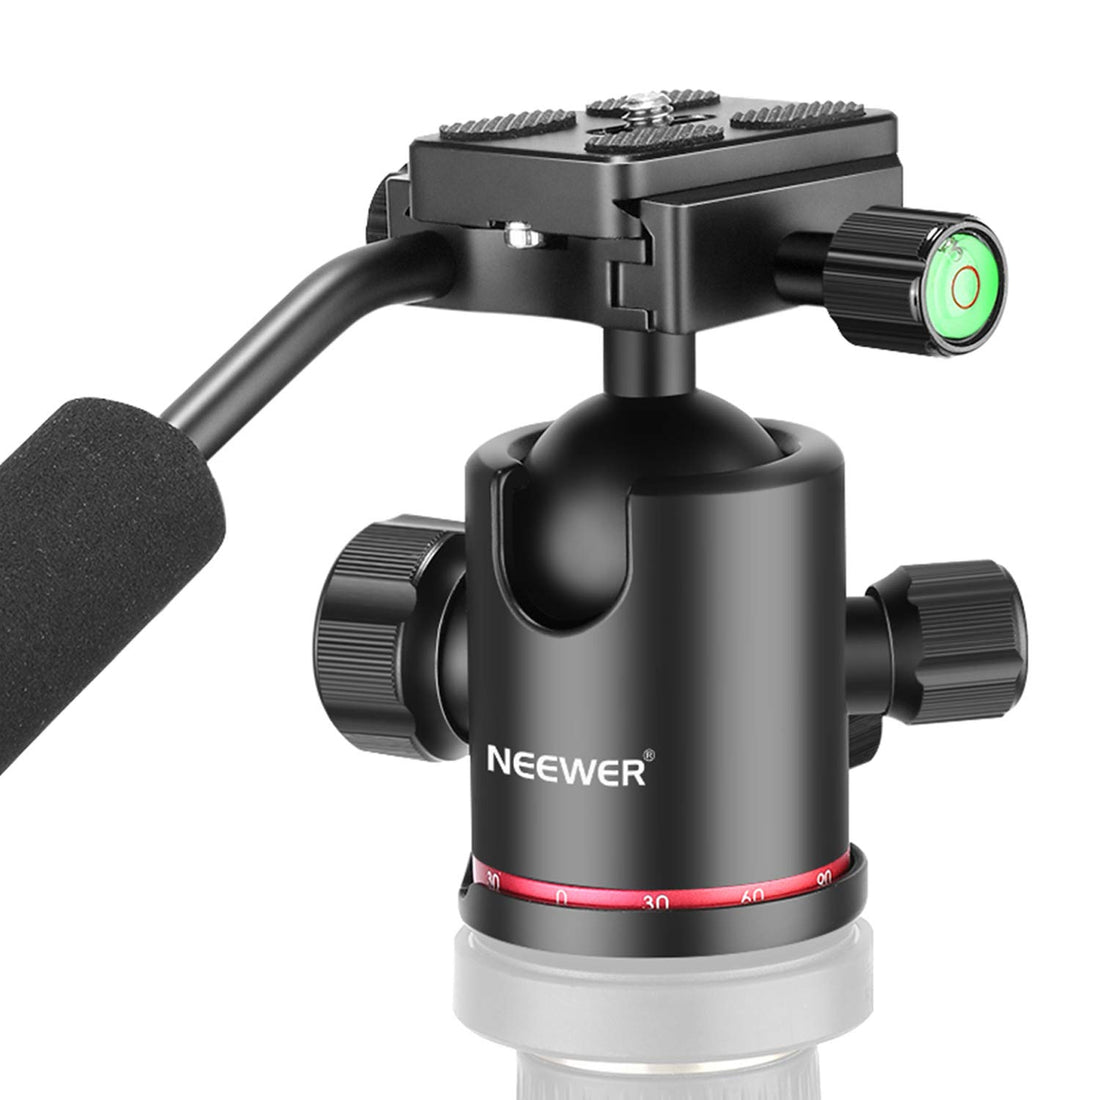 Neewer Heavy Duty Camera Tripod Ball Head with Handle and 1/4 inch Quick Shoe Plate, 360 Degree Panoramic Head for Tripod, Monopod, Slider, DSLR Camera, Camcorder, Load up to 17.6 pounds/8 kilograms